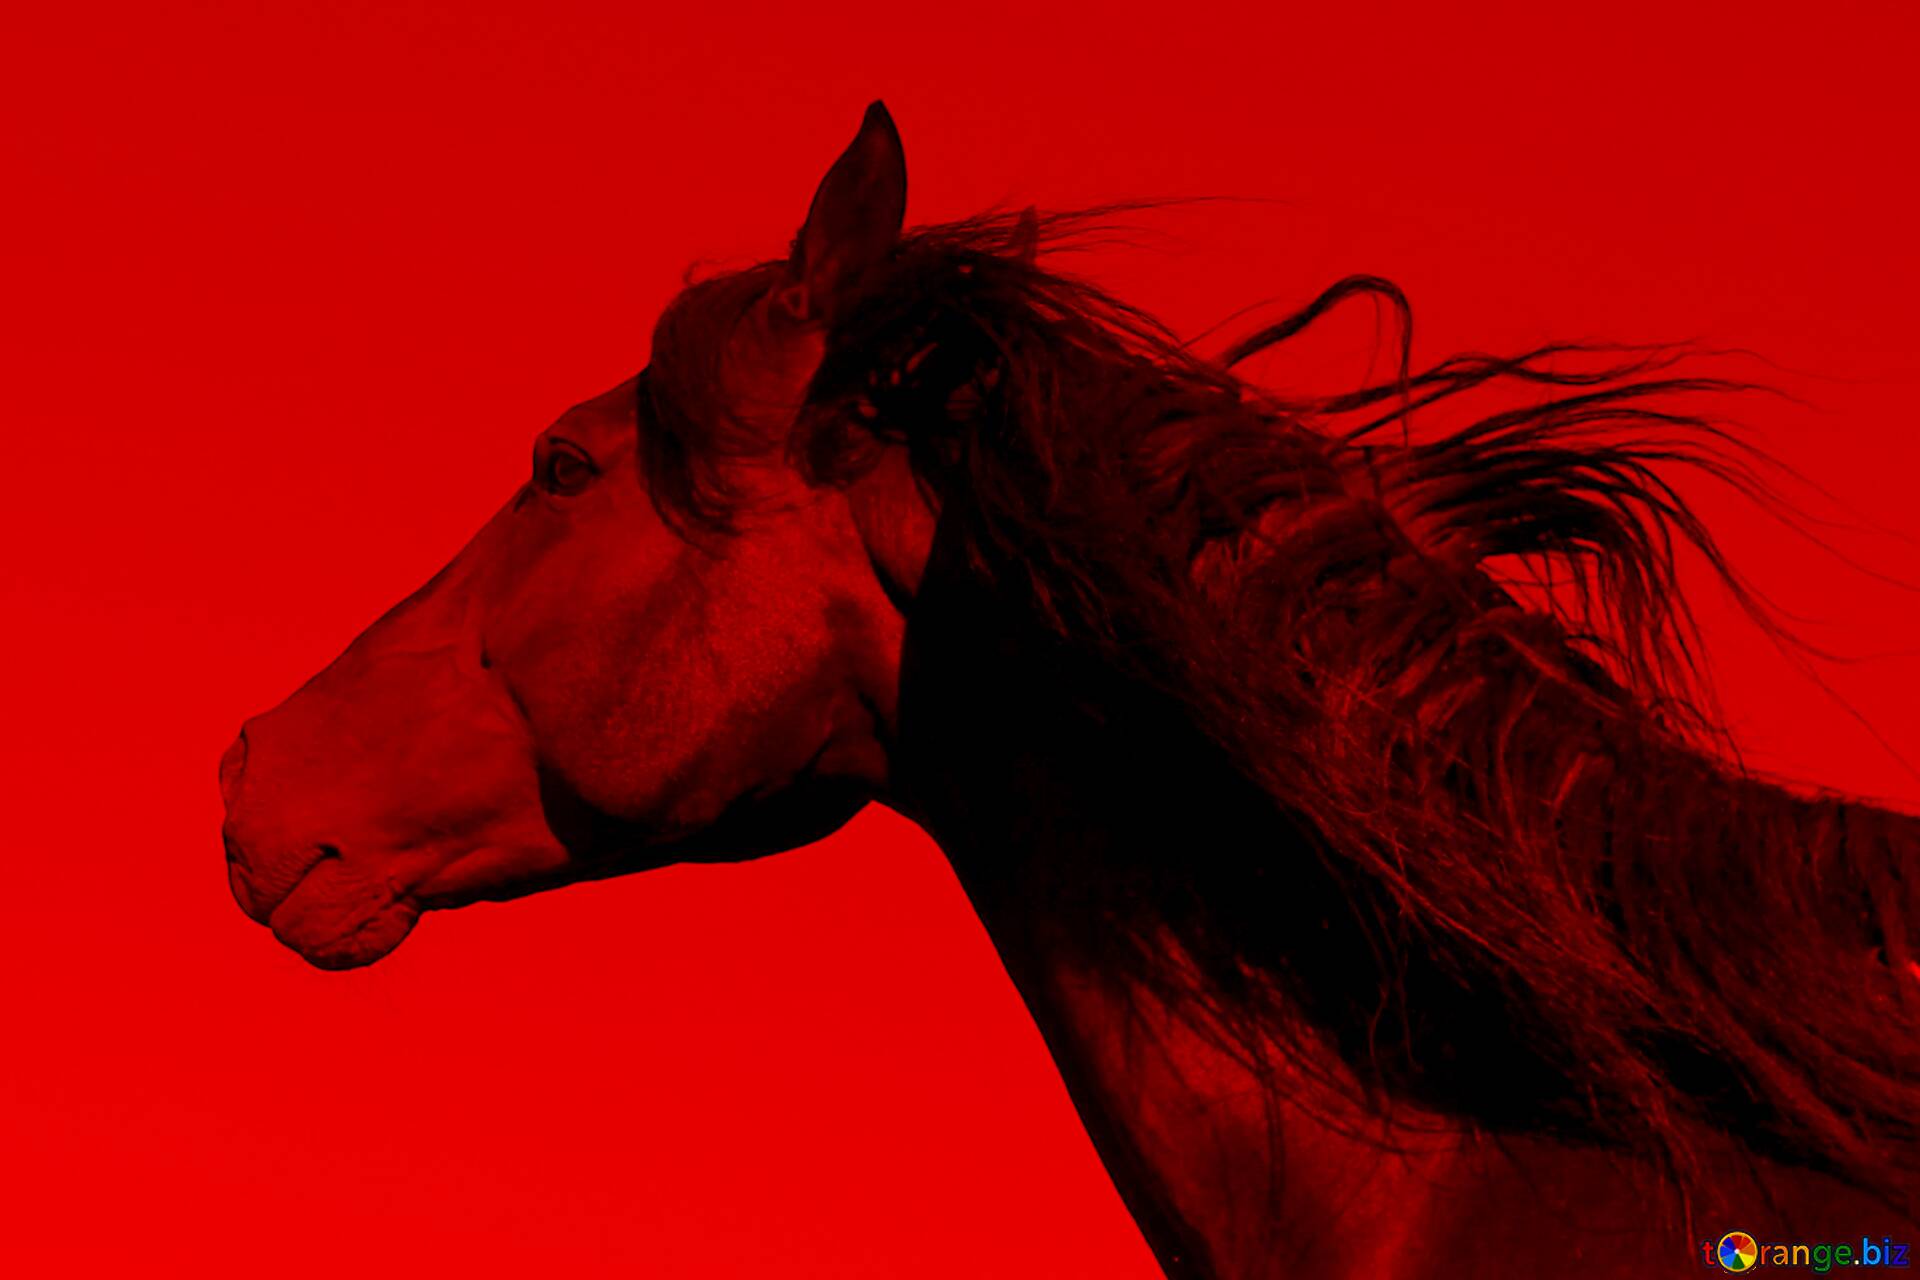 Download Free Picture Red Horse Portrait On CC BY License Free Image Stock TOrange.biz Fx №137550